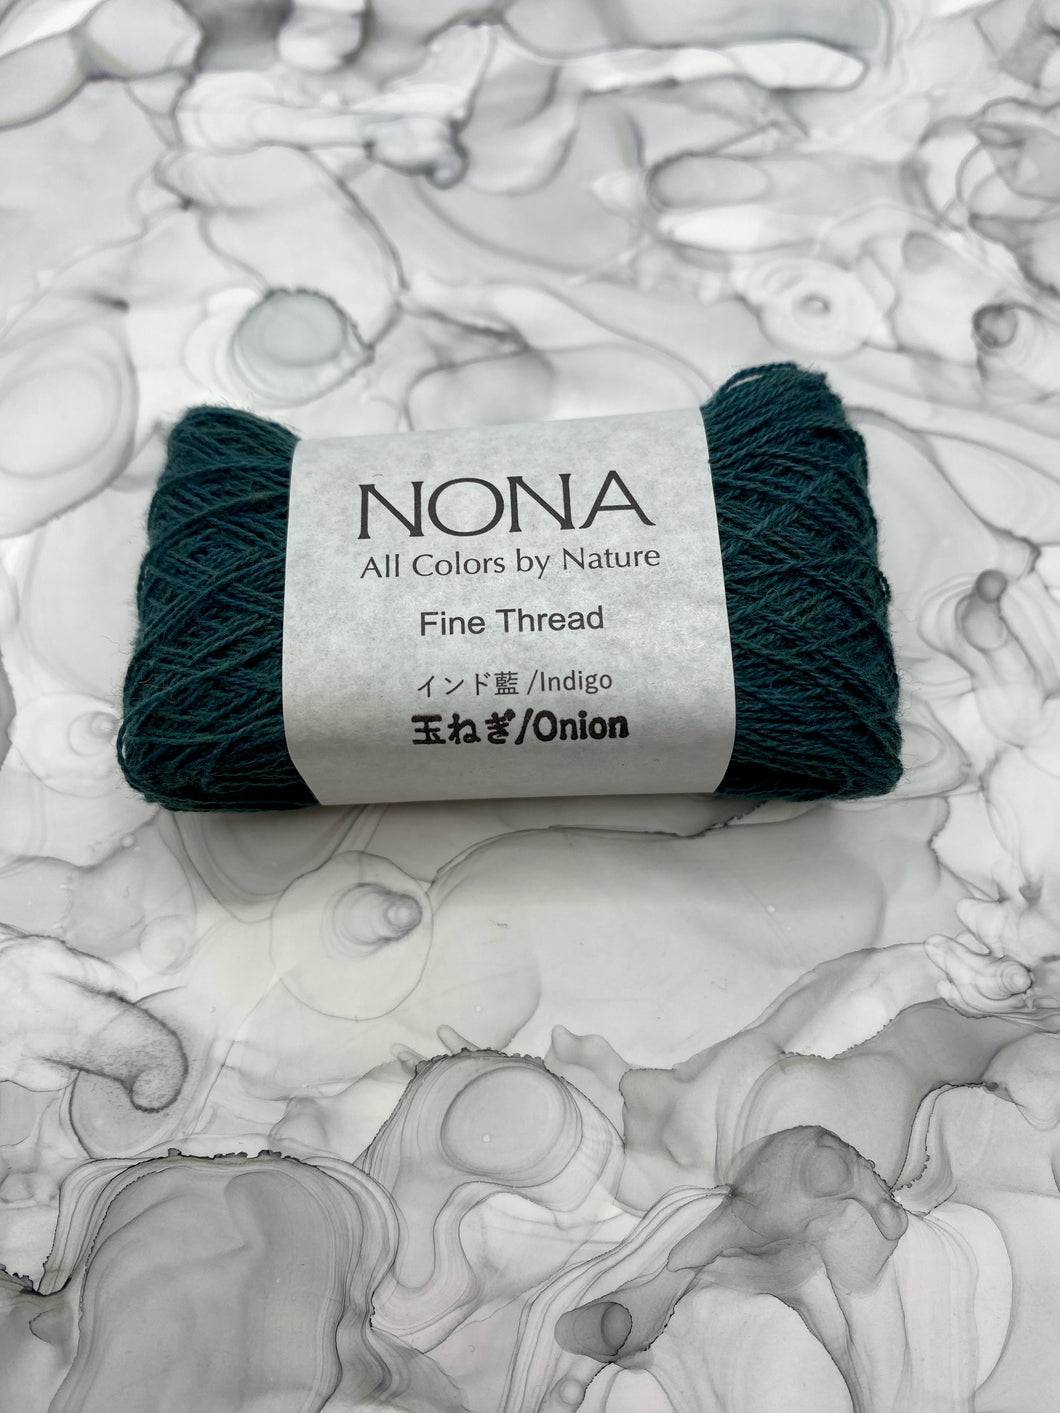 Nona Naturally Dyed Thread - Greens